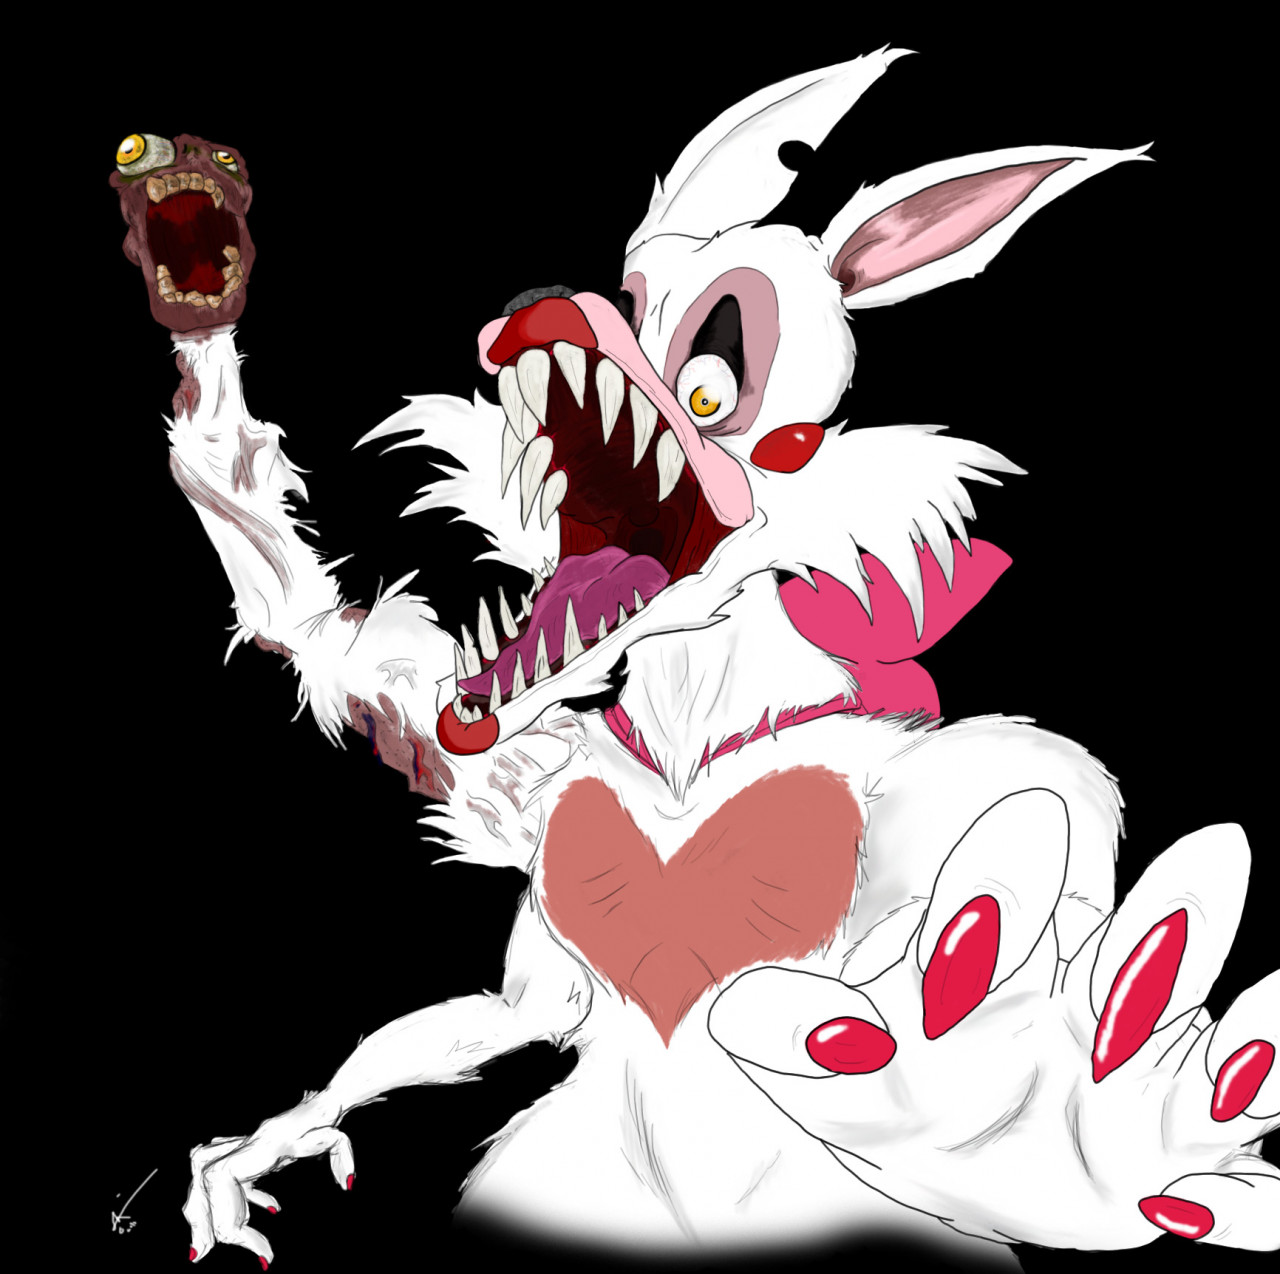 Thicc mangle